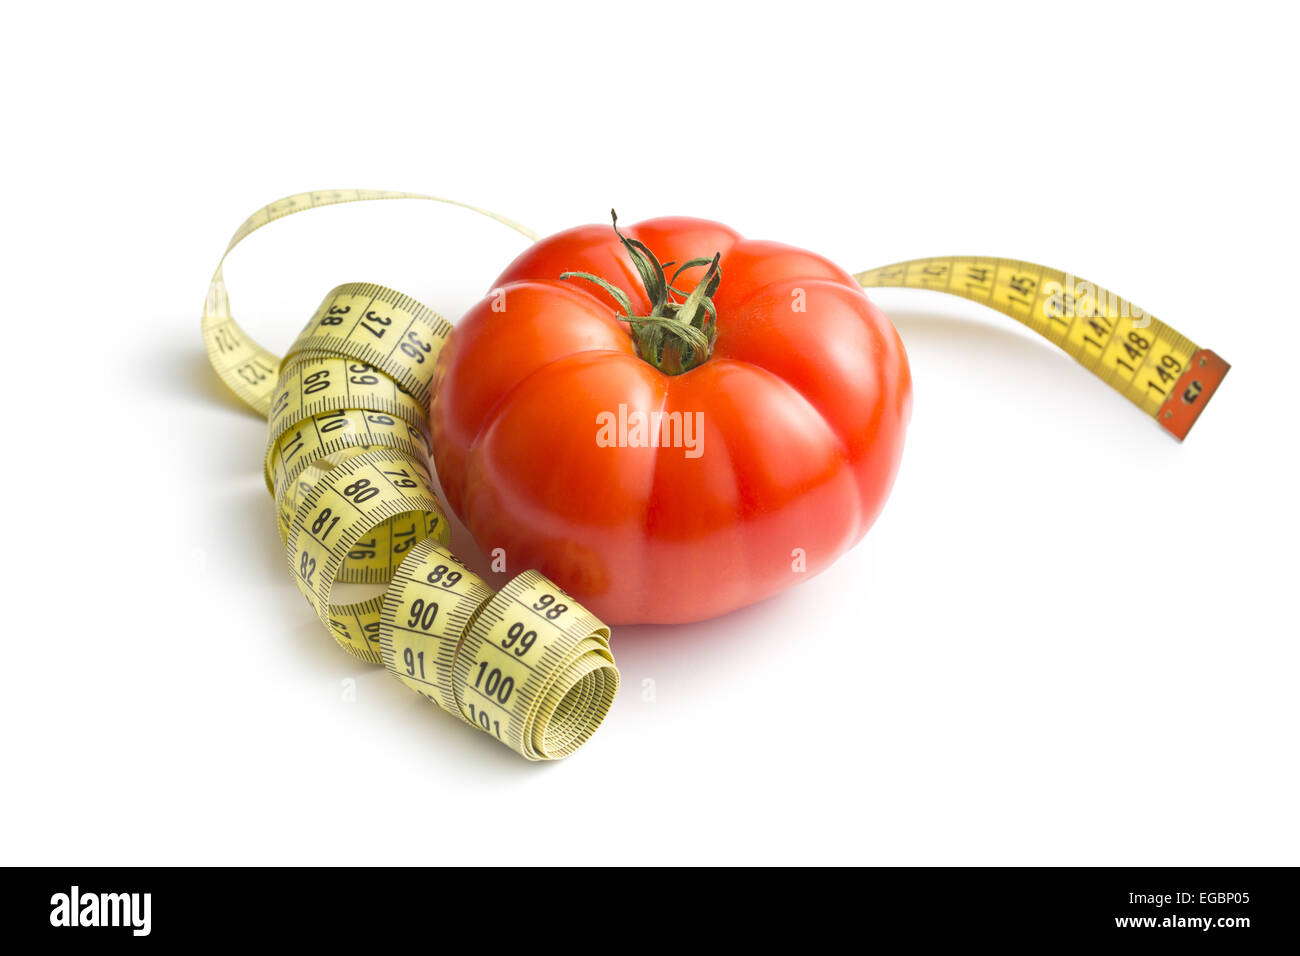 red tomato and measuring tape on white background Stock Photo